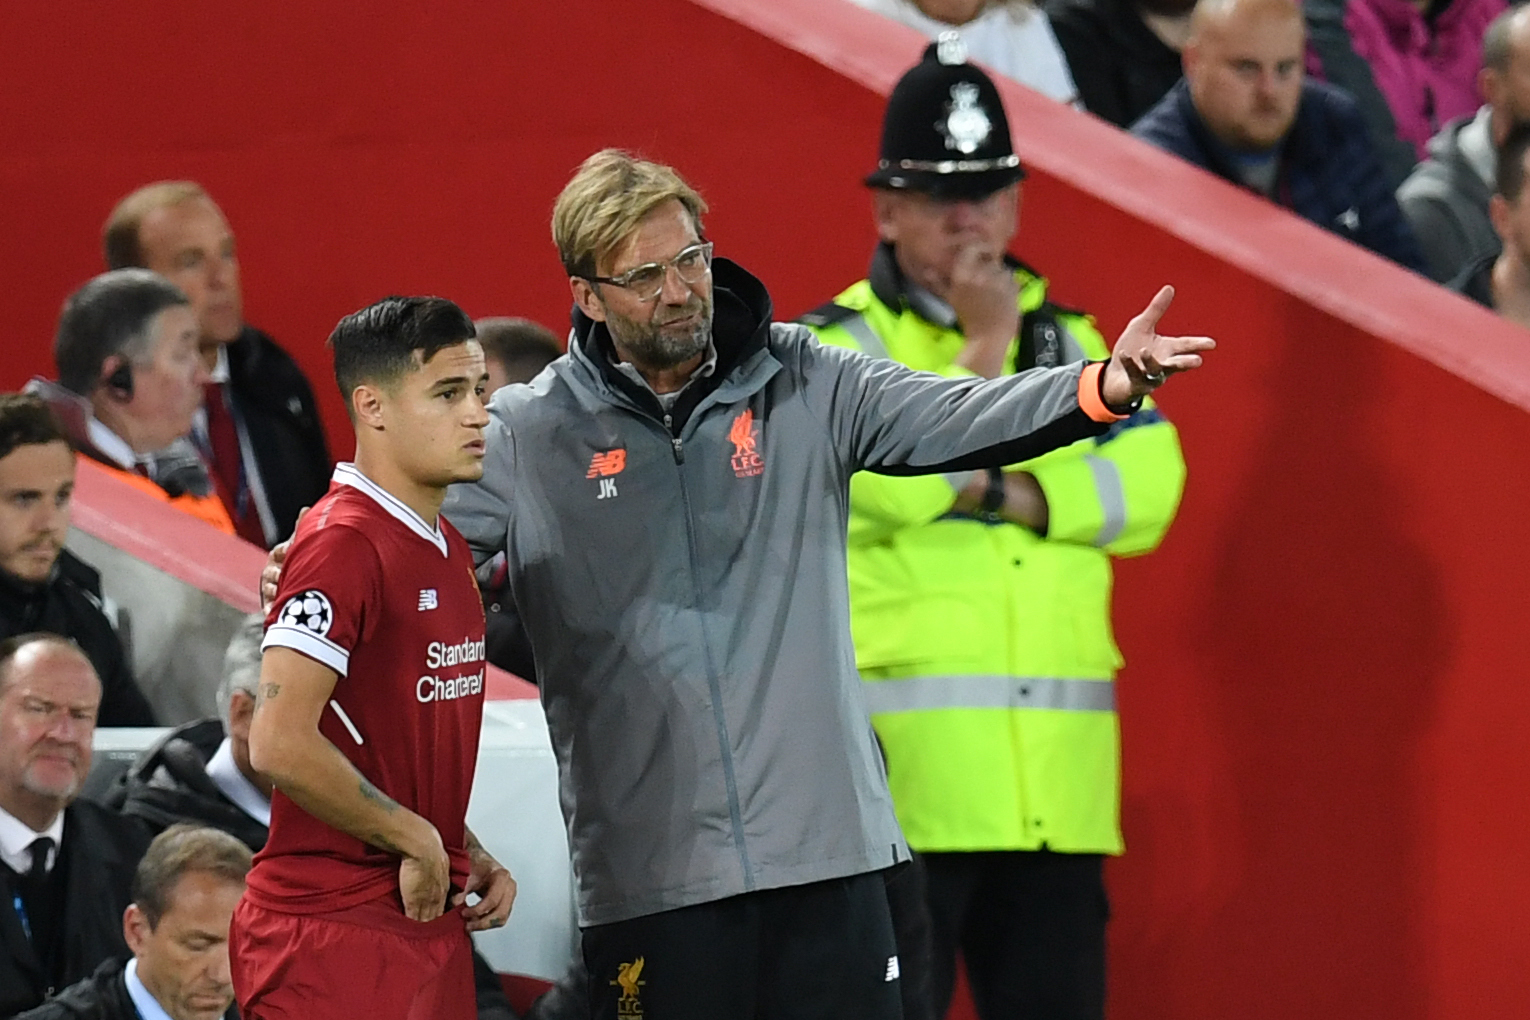 Liverpool's German manager Jurgen Klopp (C) speaks to Liverpool's Brazilian midfielder Philippe Coutinho as he prepares to play during the UEFA Champions League Group E football match between Liverpool and Sevilla at Anfield in Liverpool, north-west England on September 13, 2017. / AFP PHOTO / Paul ELLIS        (Photo credit should read PAUL ELLIS/AFP/Getty Images)